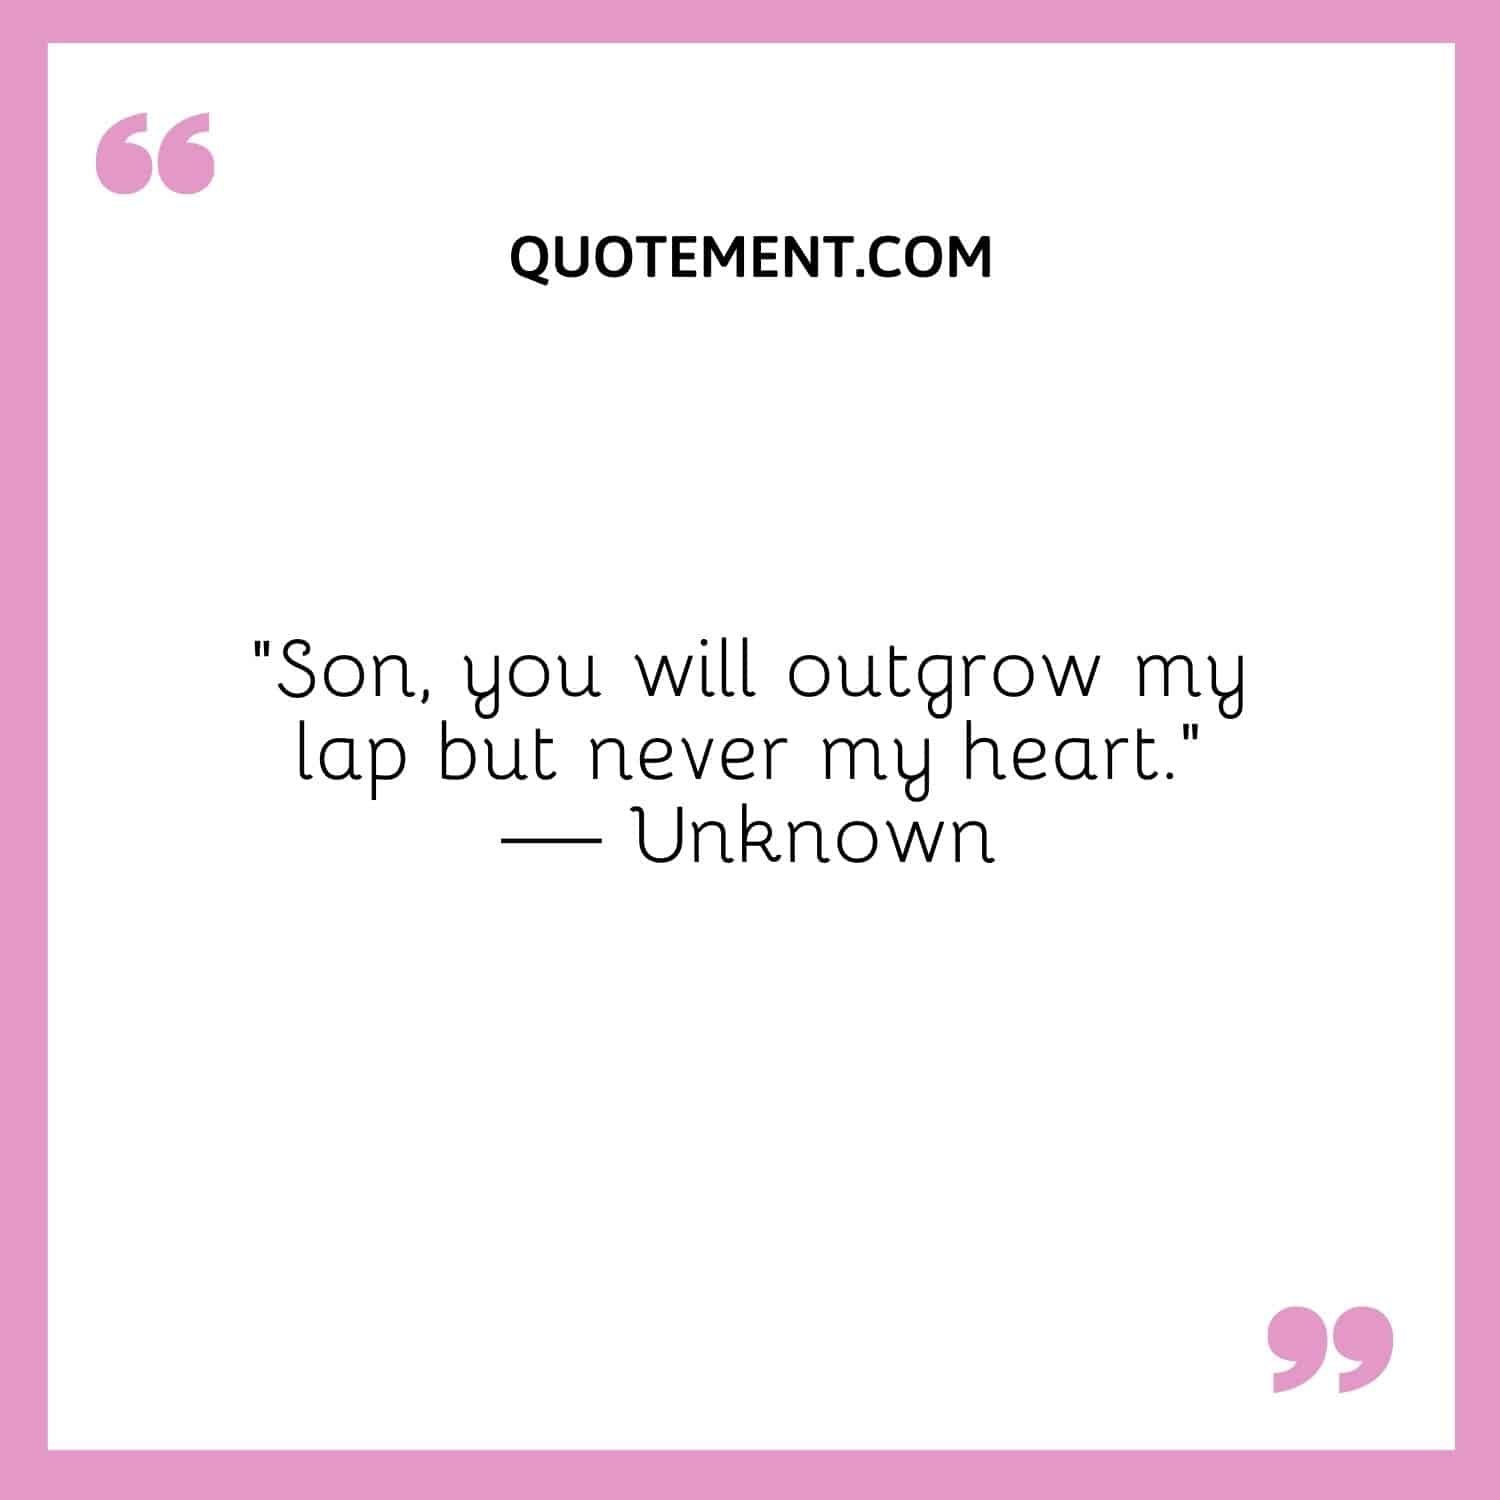 Son, you will outgrow my lap but never my heart